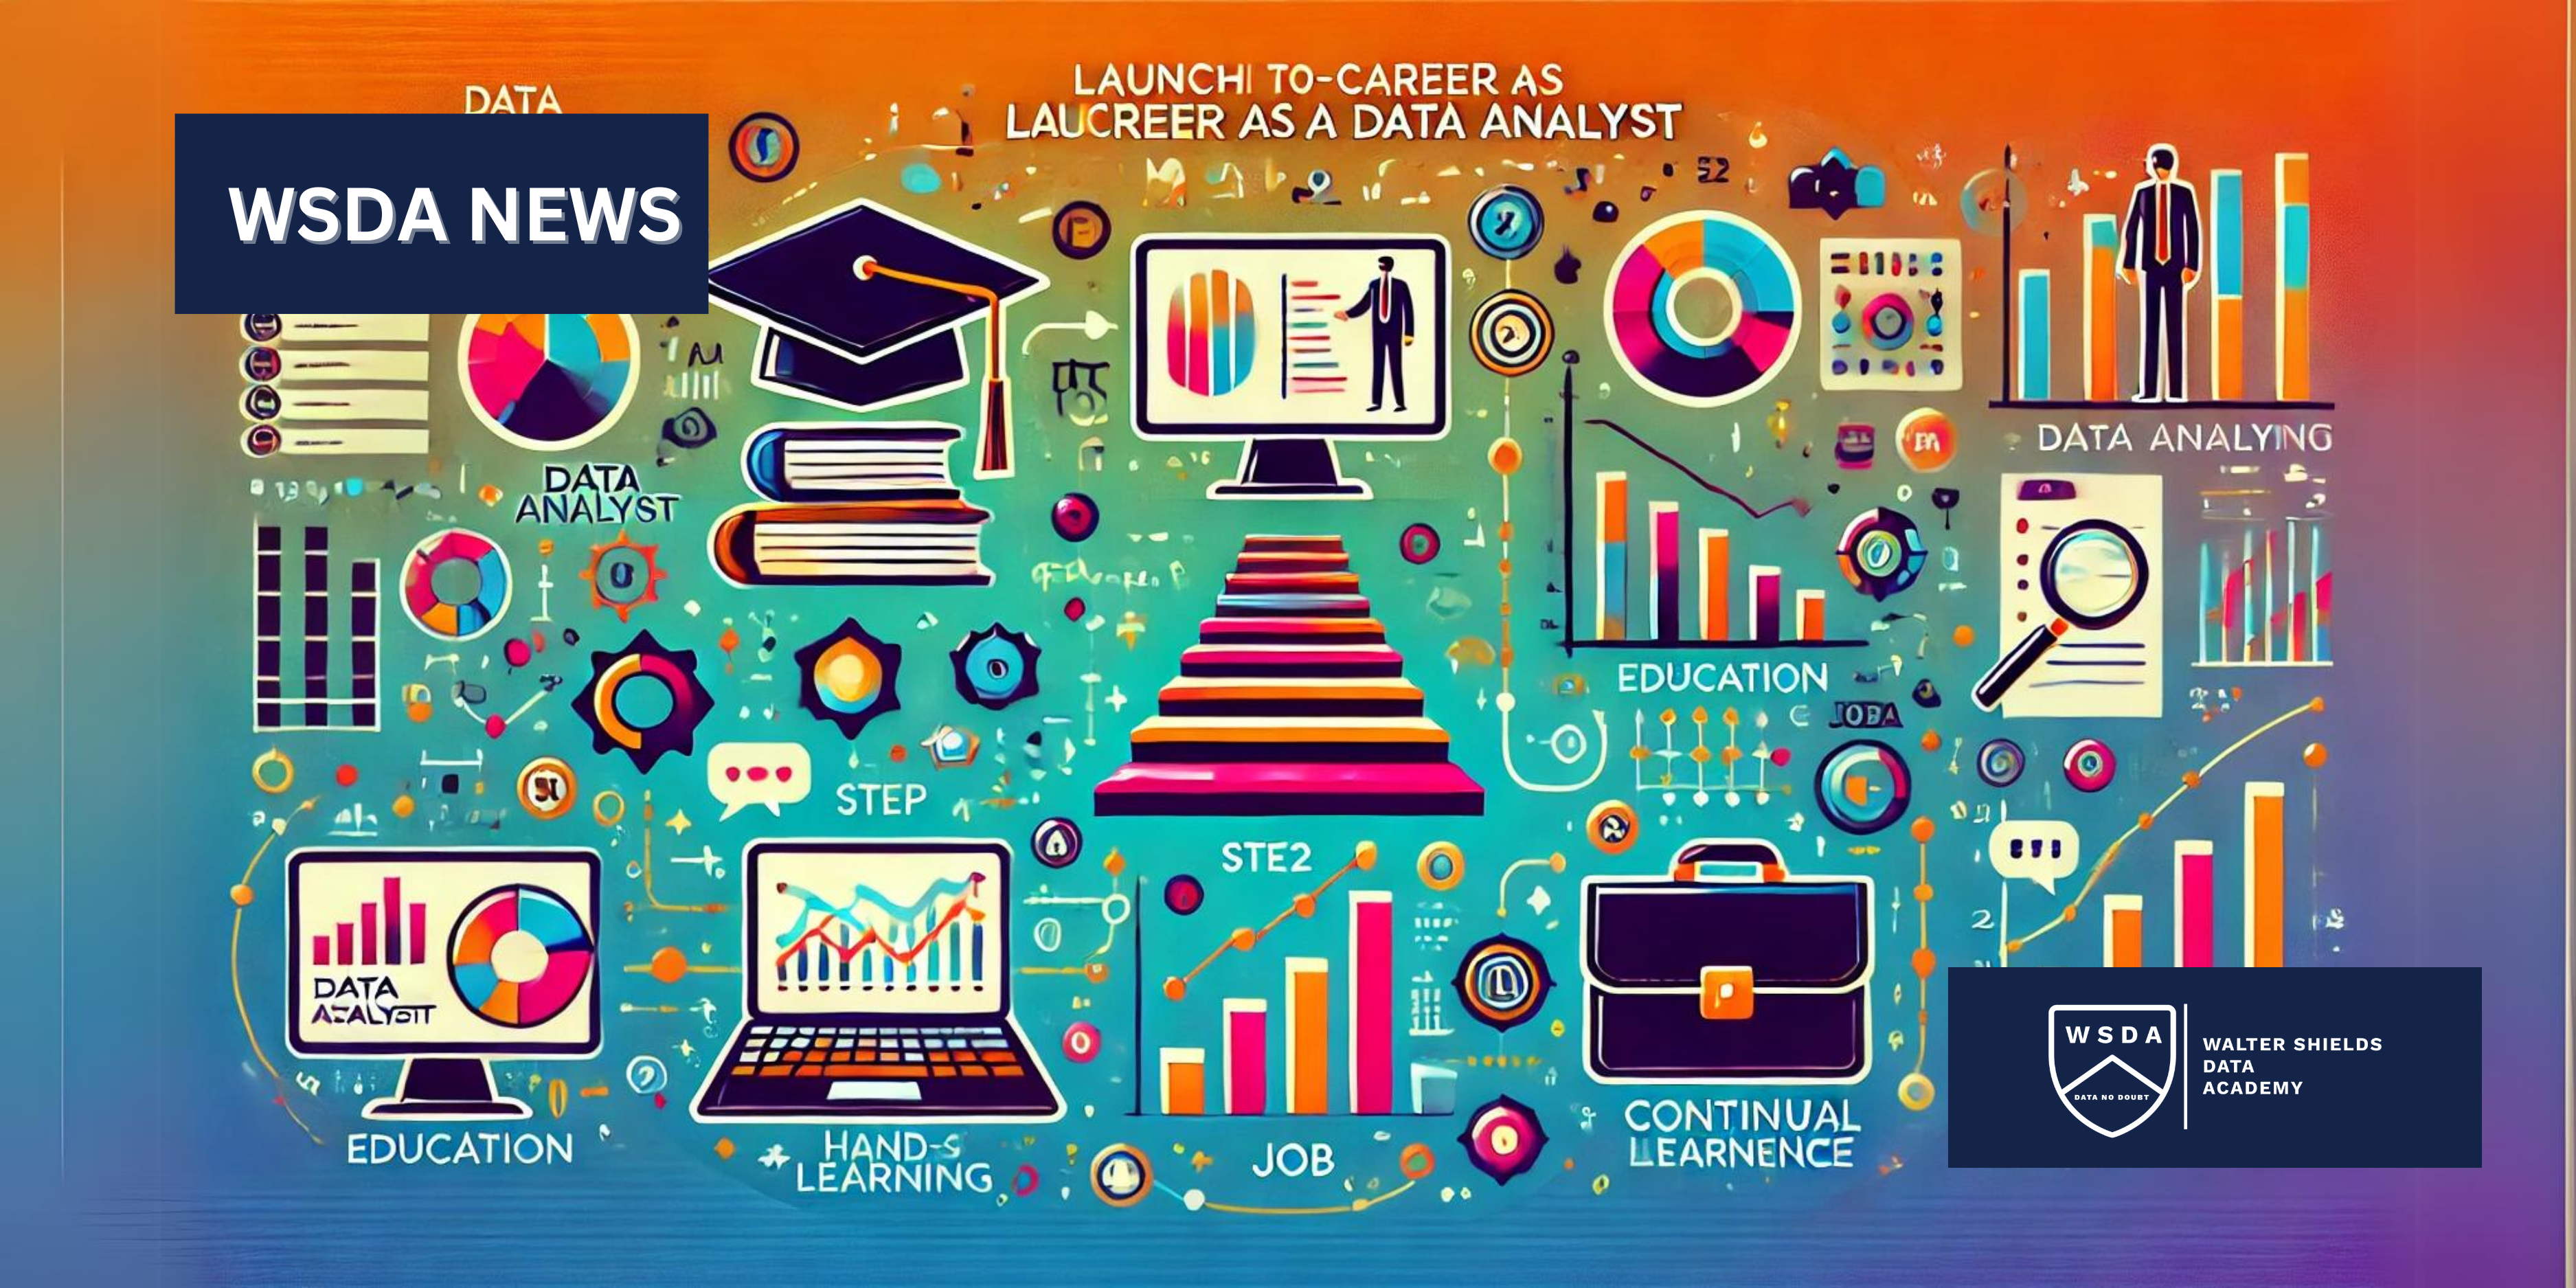 Step-by-Step Guide for Launching Your Career as a Data Analyst